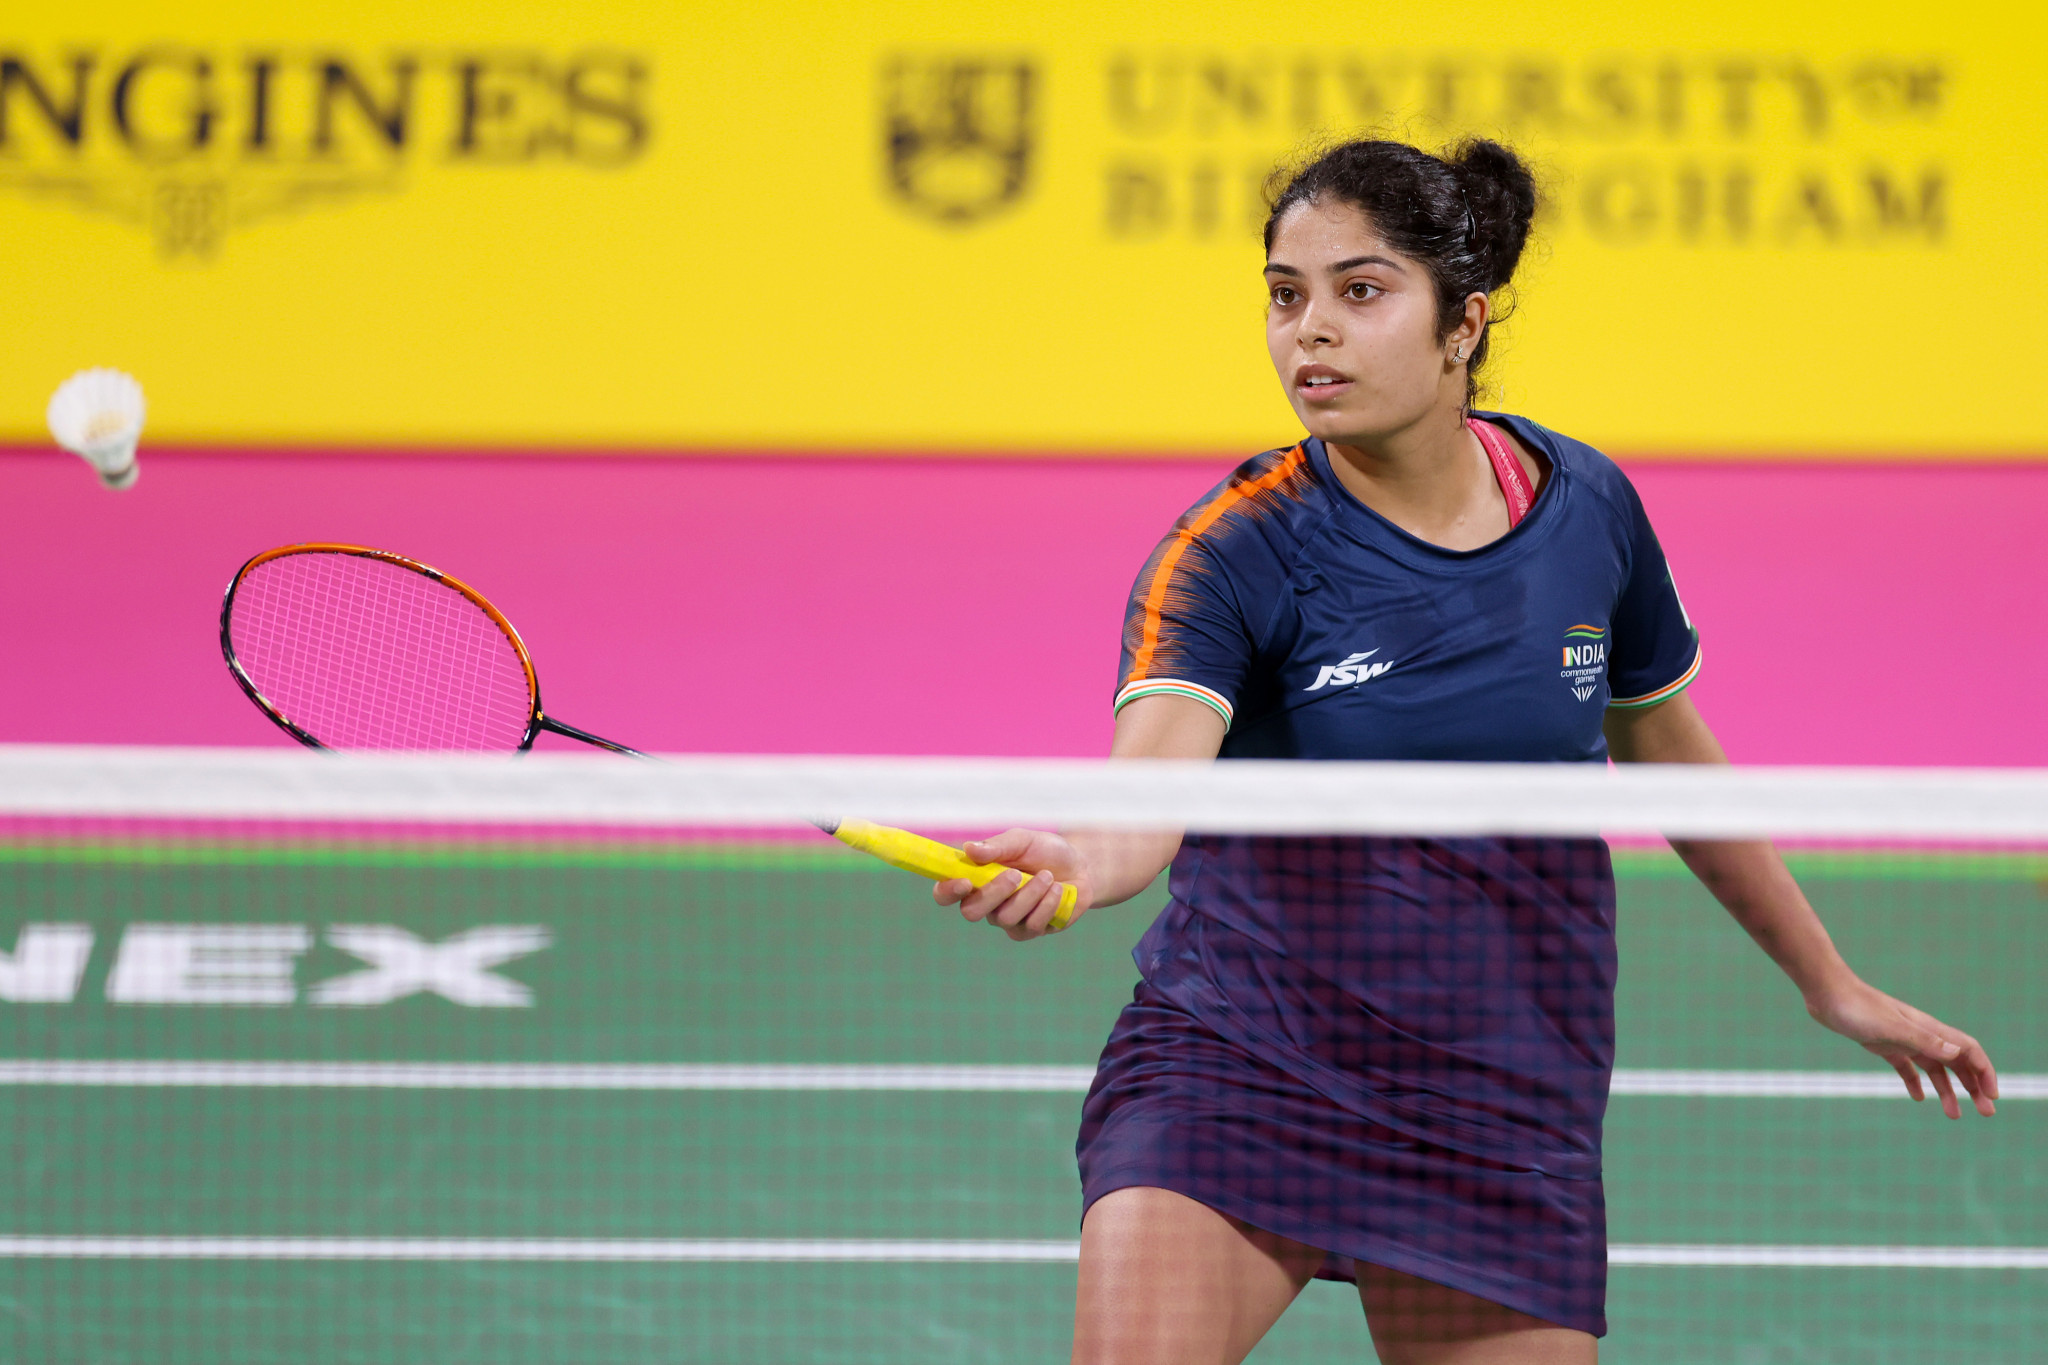 India's Aakarshi Kashyap seized her opportunity with a victory in the women's singles when PV Sindhu was rested ©Getty Images